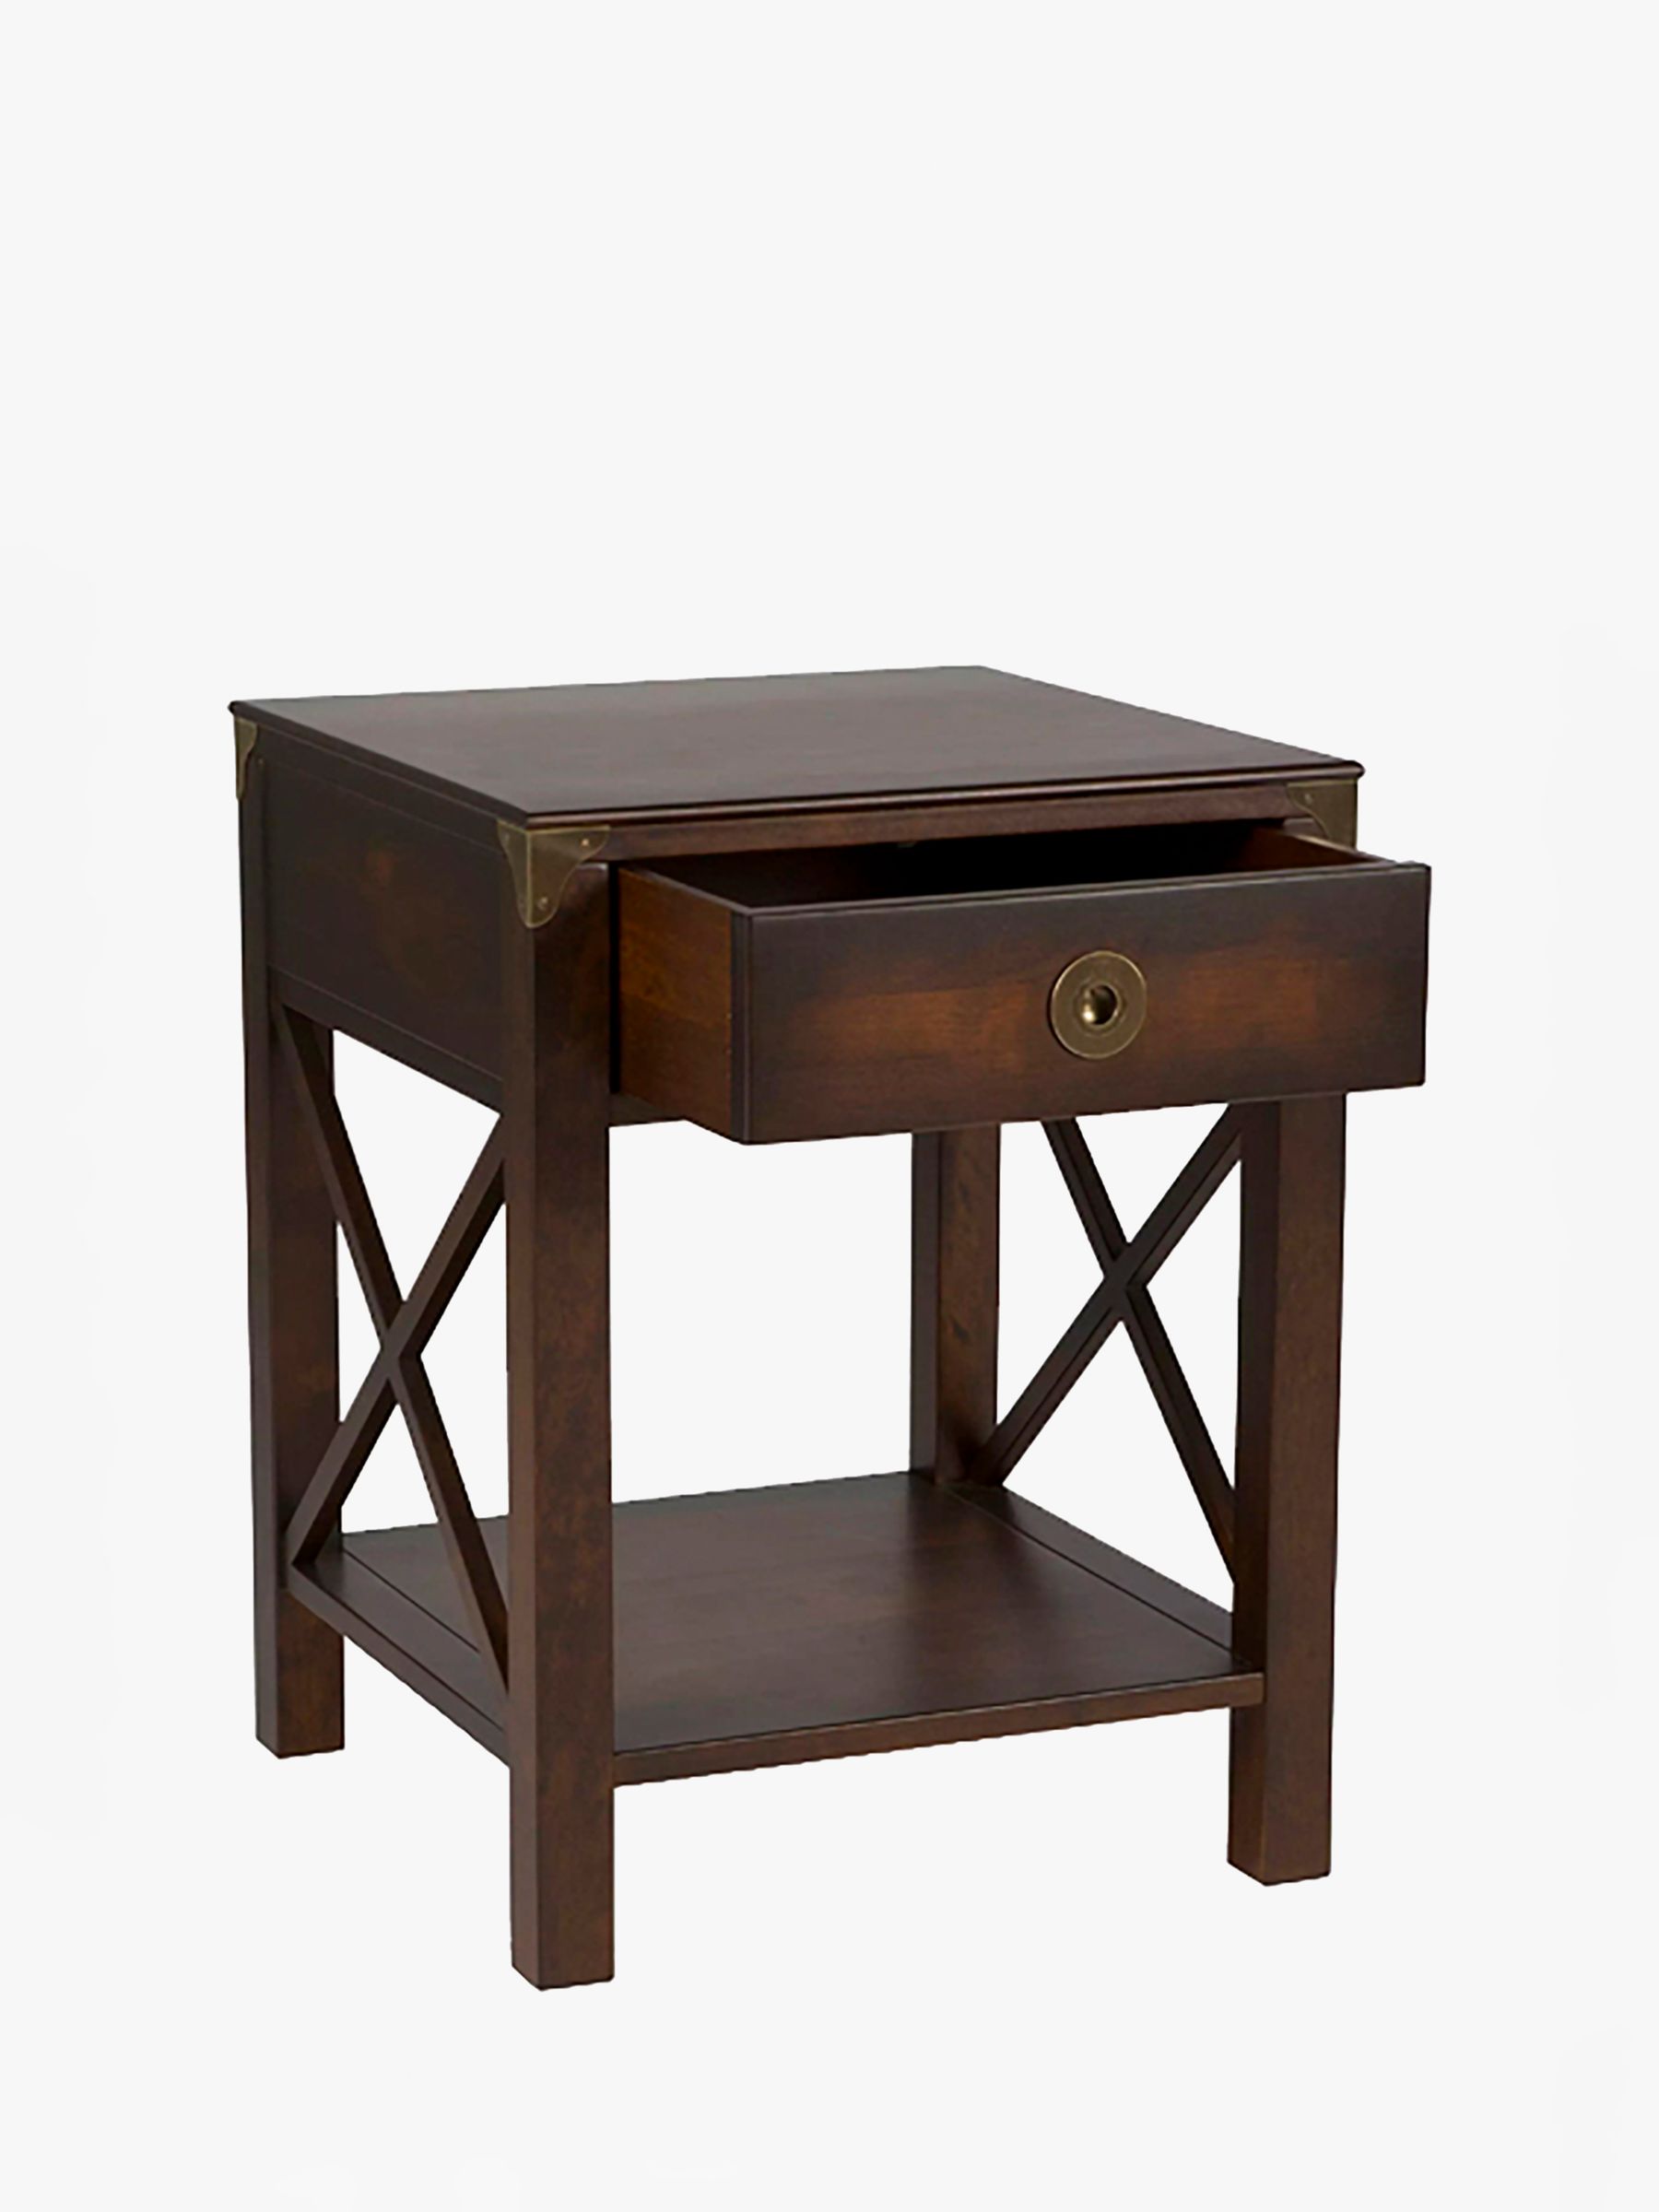 Photo of Laura ashley balmoral side table chestnut brown